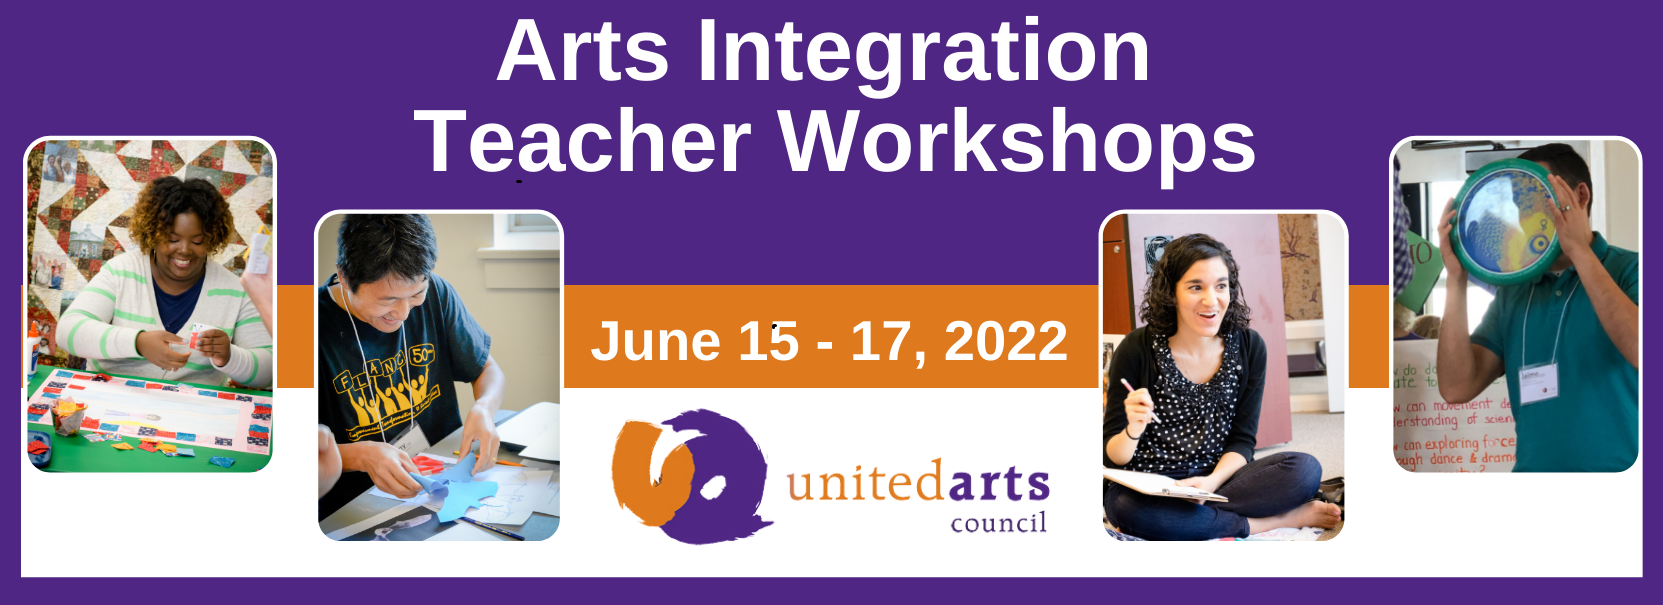 Arts Integration Teacher Workshops June 15-17, 2022 with United Arts logo and four photos of teachers at previous workshops